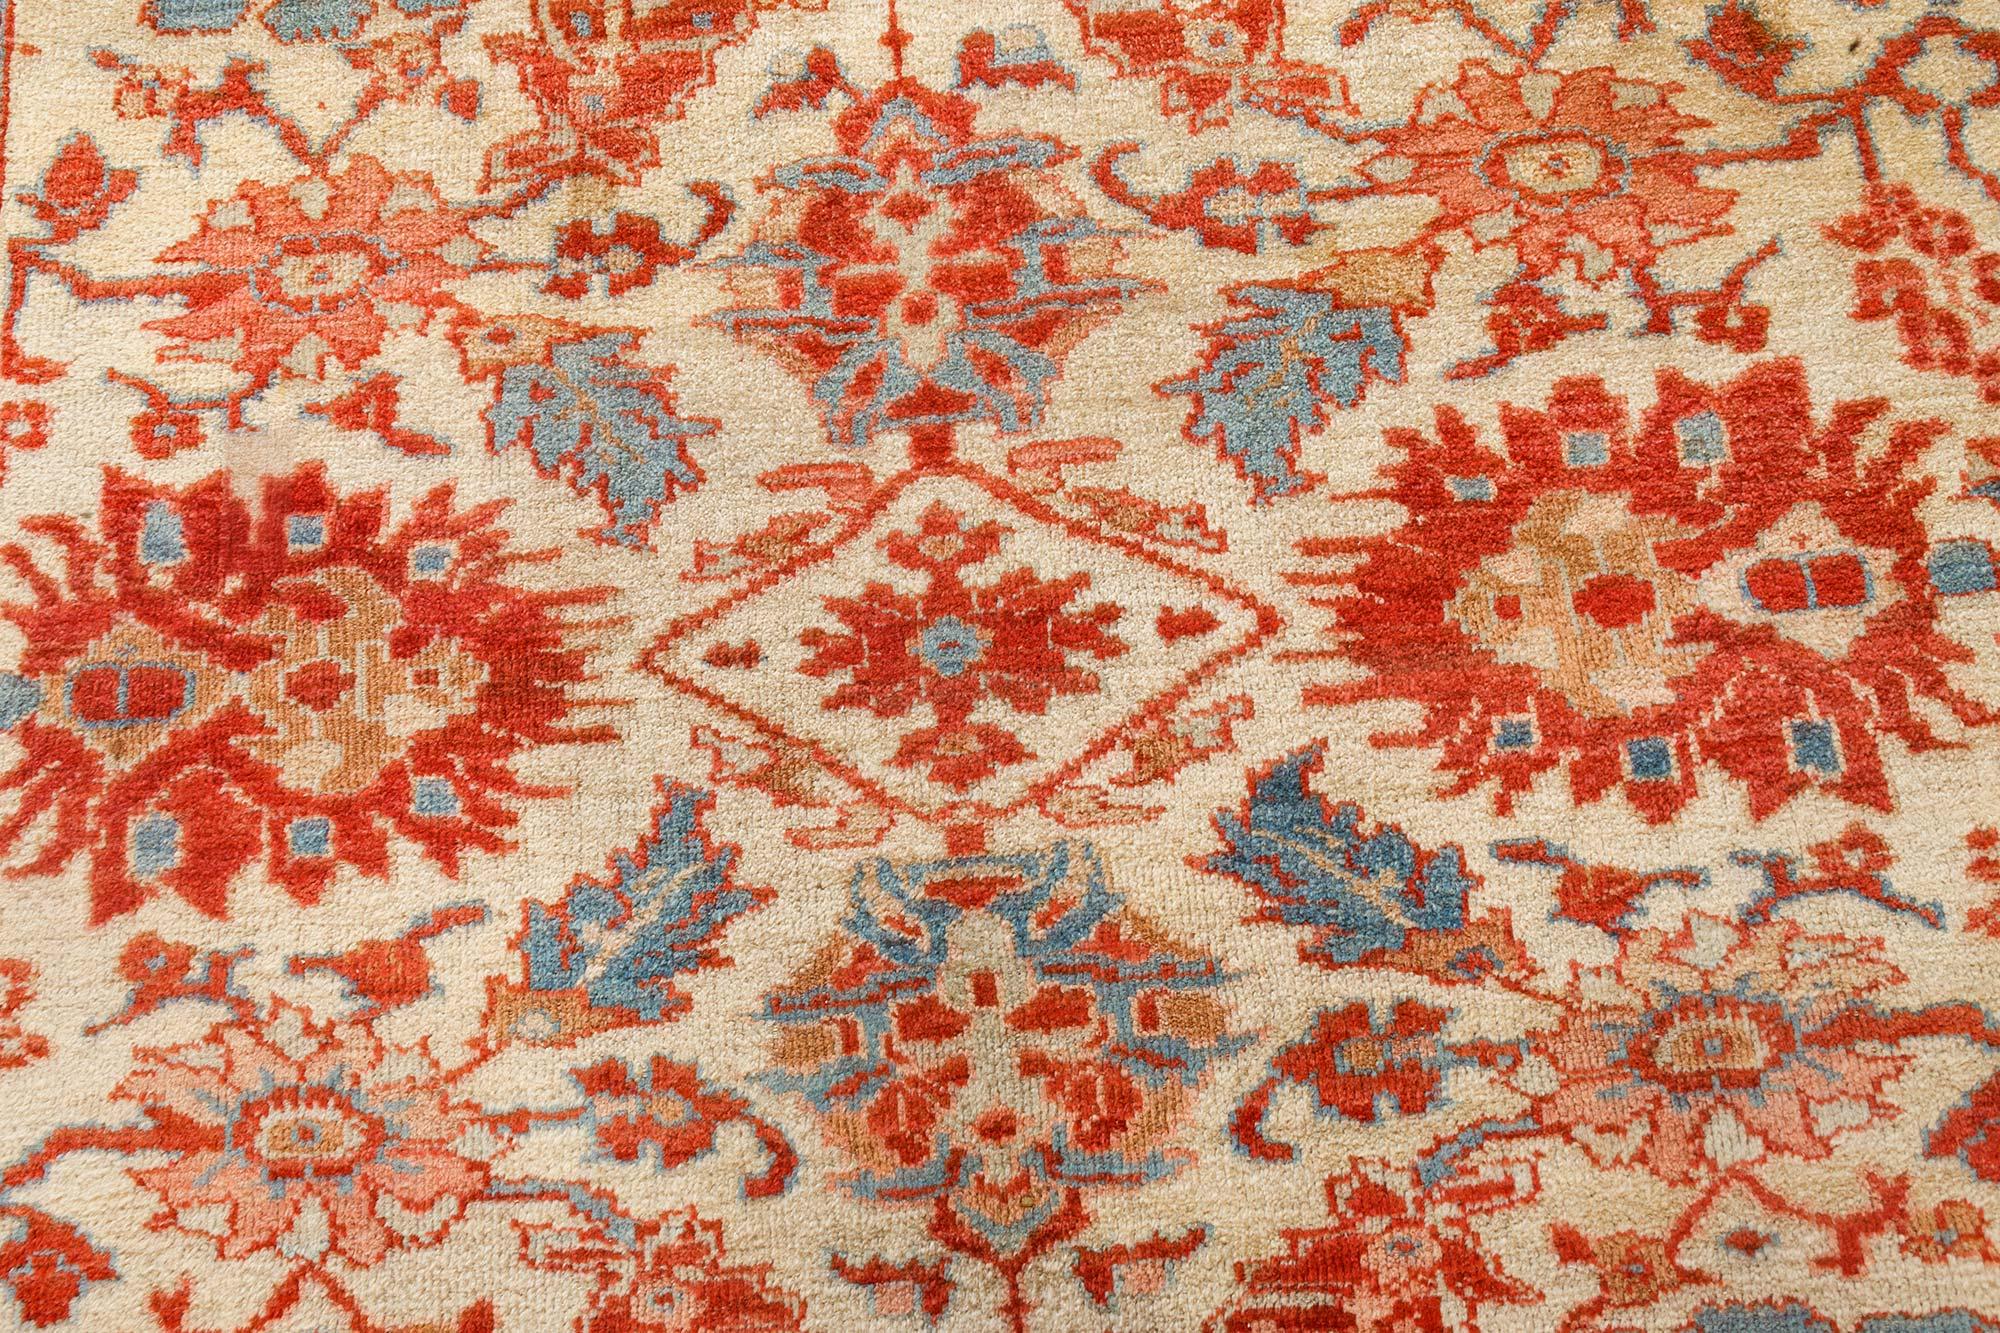 1900s Persian Sultanabad beige, blue, brown, pink and red handwoven wool rug 
(Size adjusted).
The main field of this Sultanabad rug, made circa 1900, is occupied by an allover botanical grid with palmettes, herati, and flower motifs. This design is